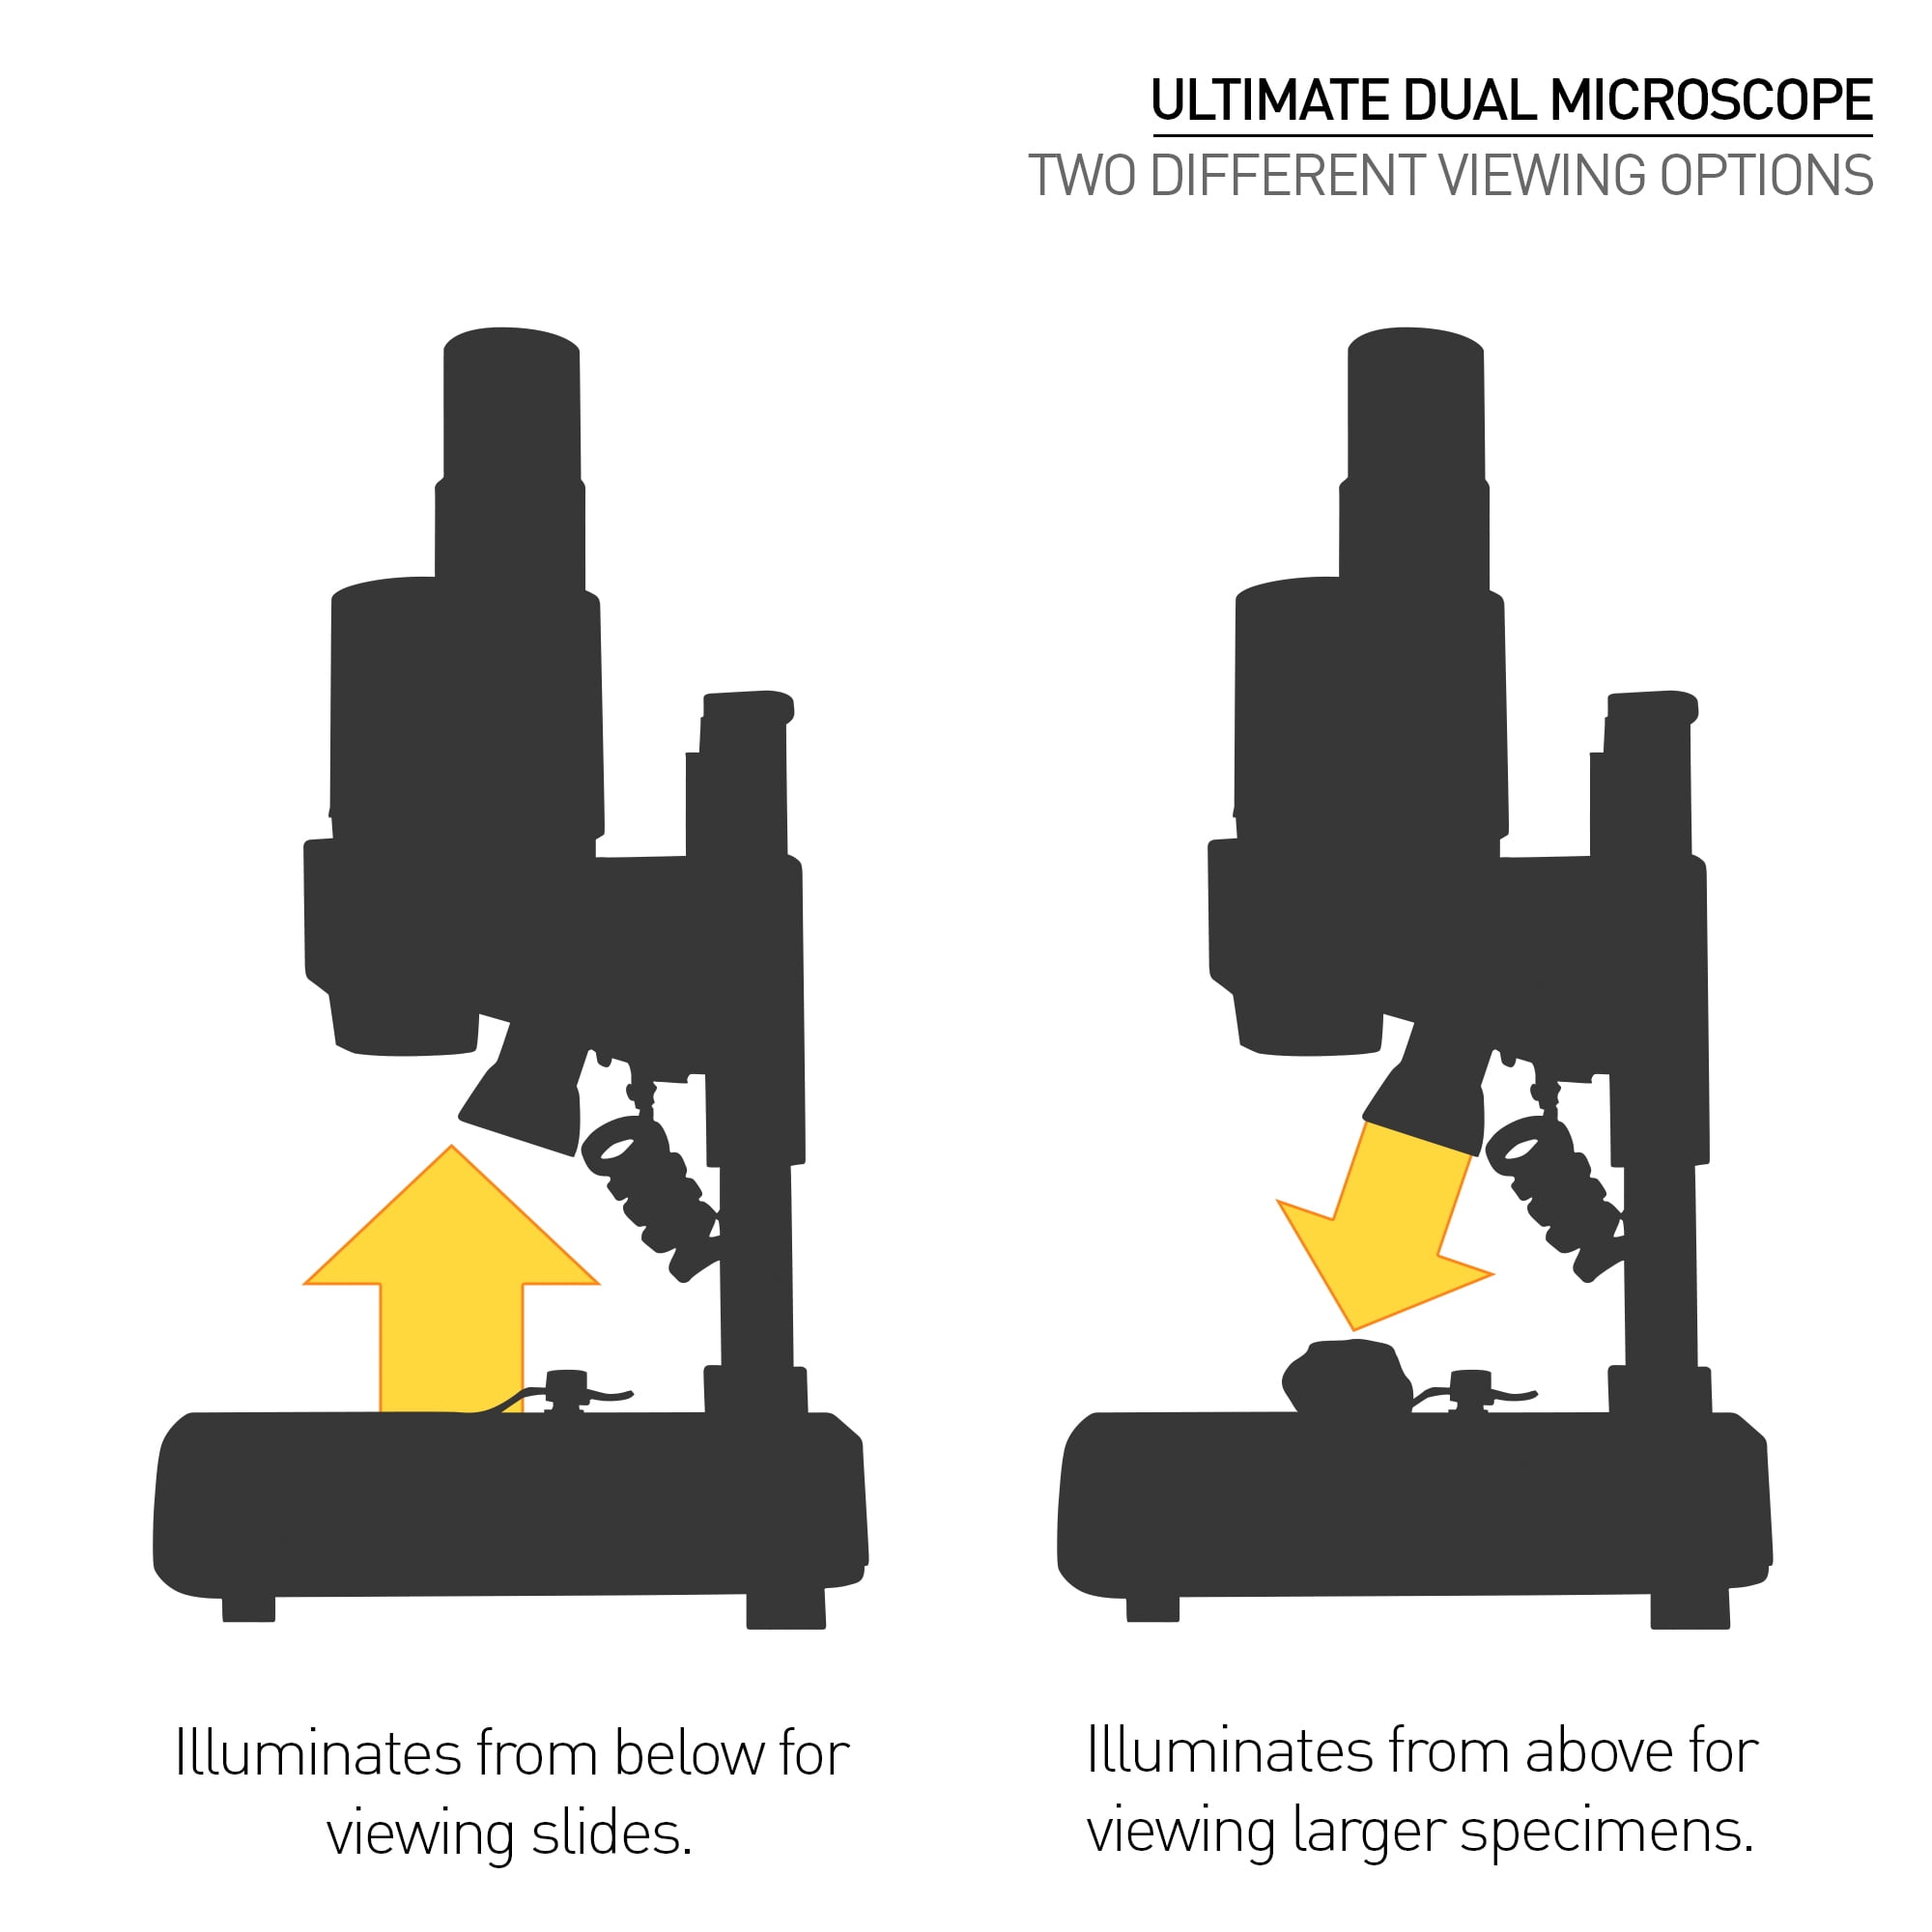 Microscope by National Geographic - Dual Purpose Illumination and